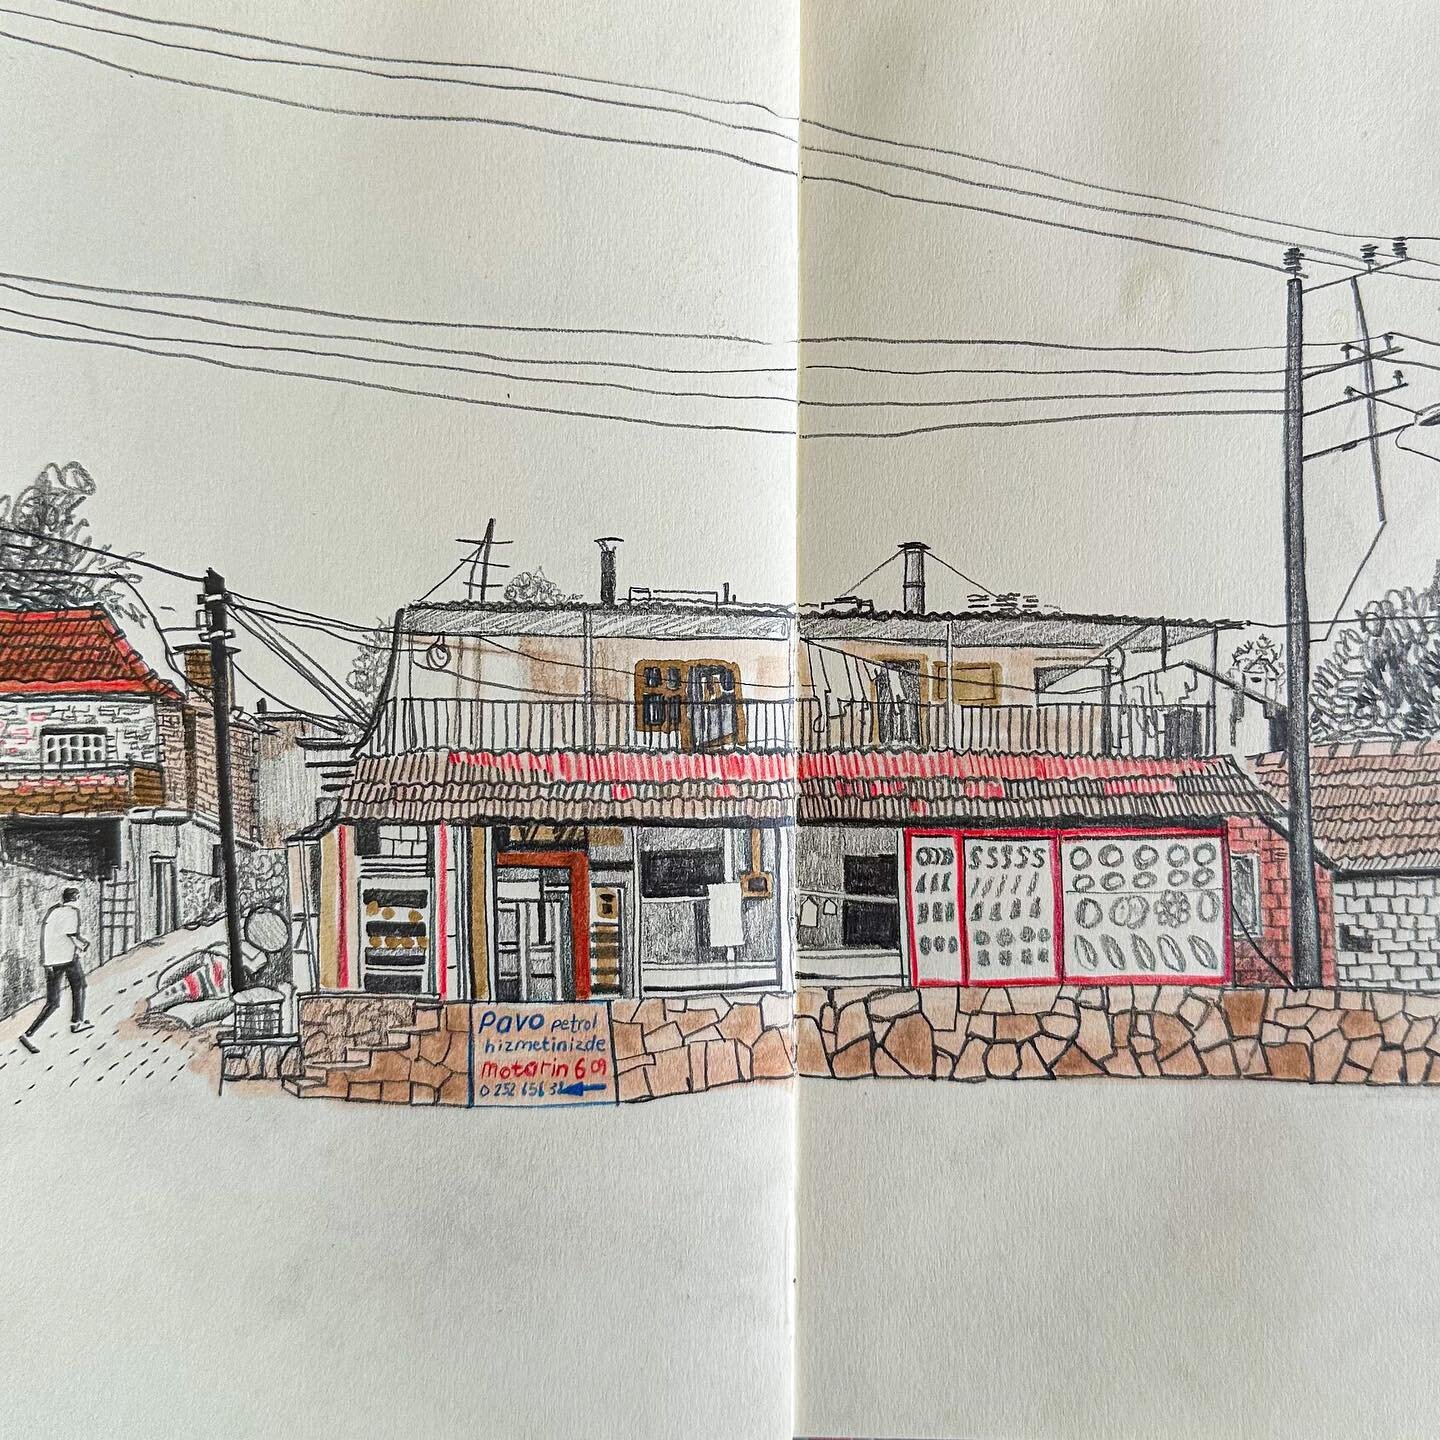 Loved all the shapes and lines that made up this bakery 
&bull;
&bull;
&bull;
#walktosee #observationaldrawing #drawdrawdraw #sketchbookdrawing #sketchbook #locationdrawing #csacbi #csacbi2024 #cambridgeschoolofart #pencildrawing #limitedcolour #fabe